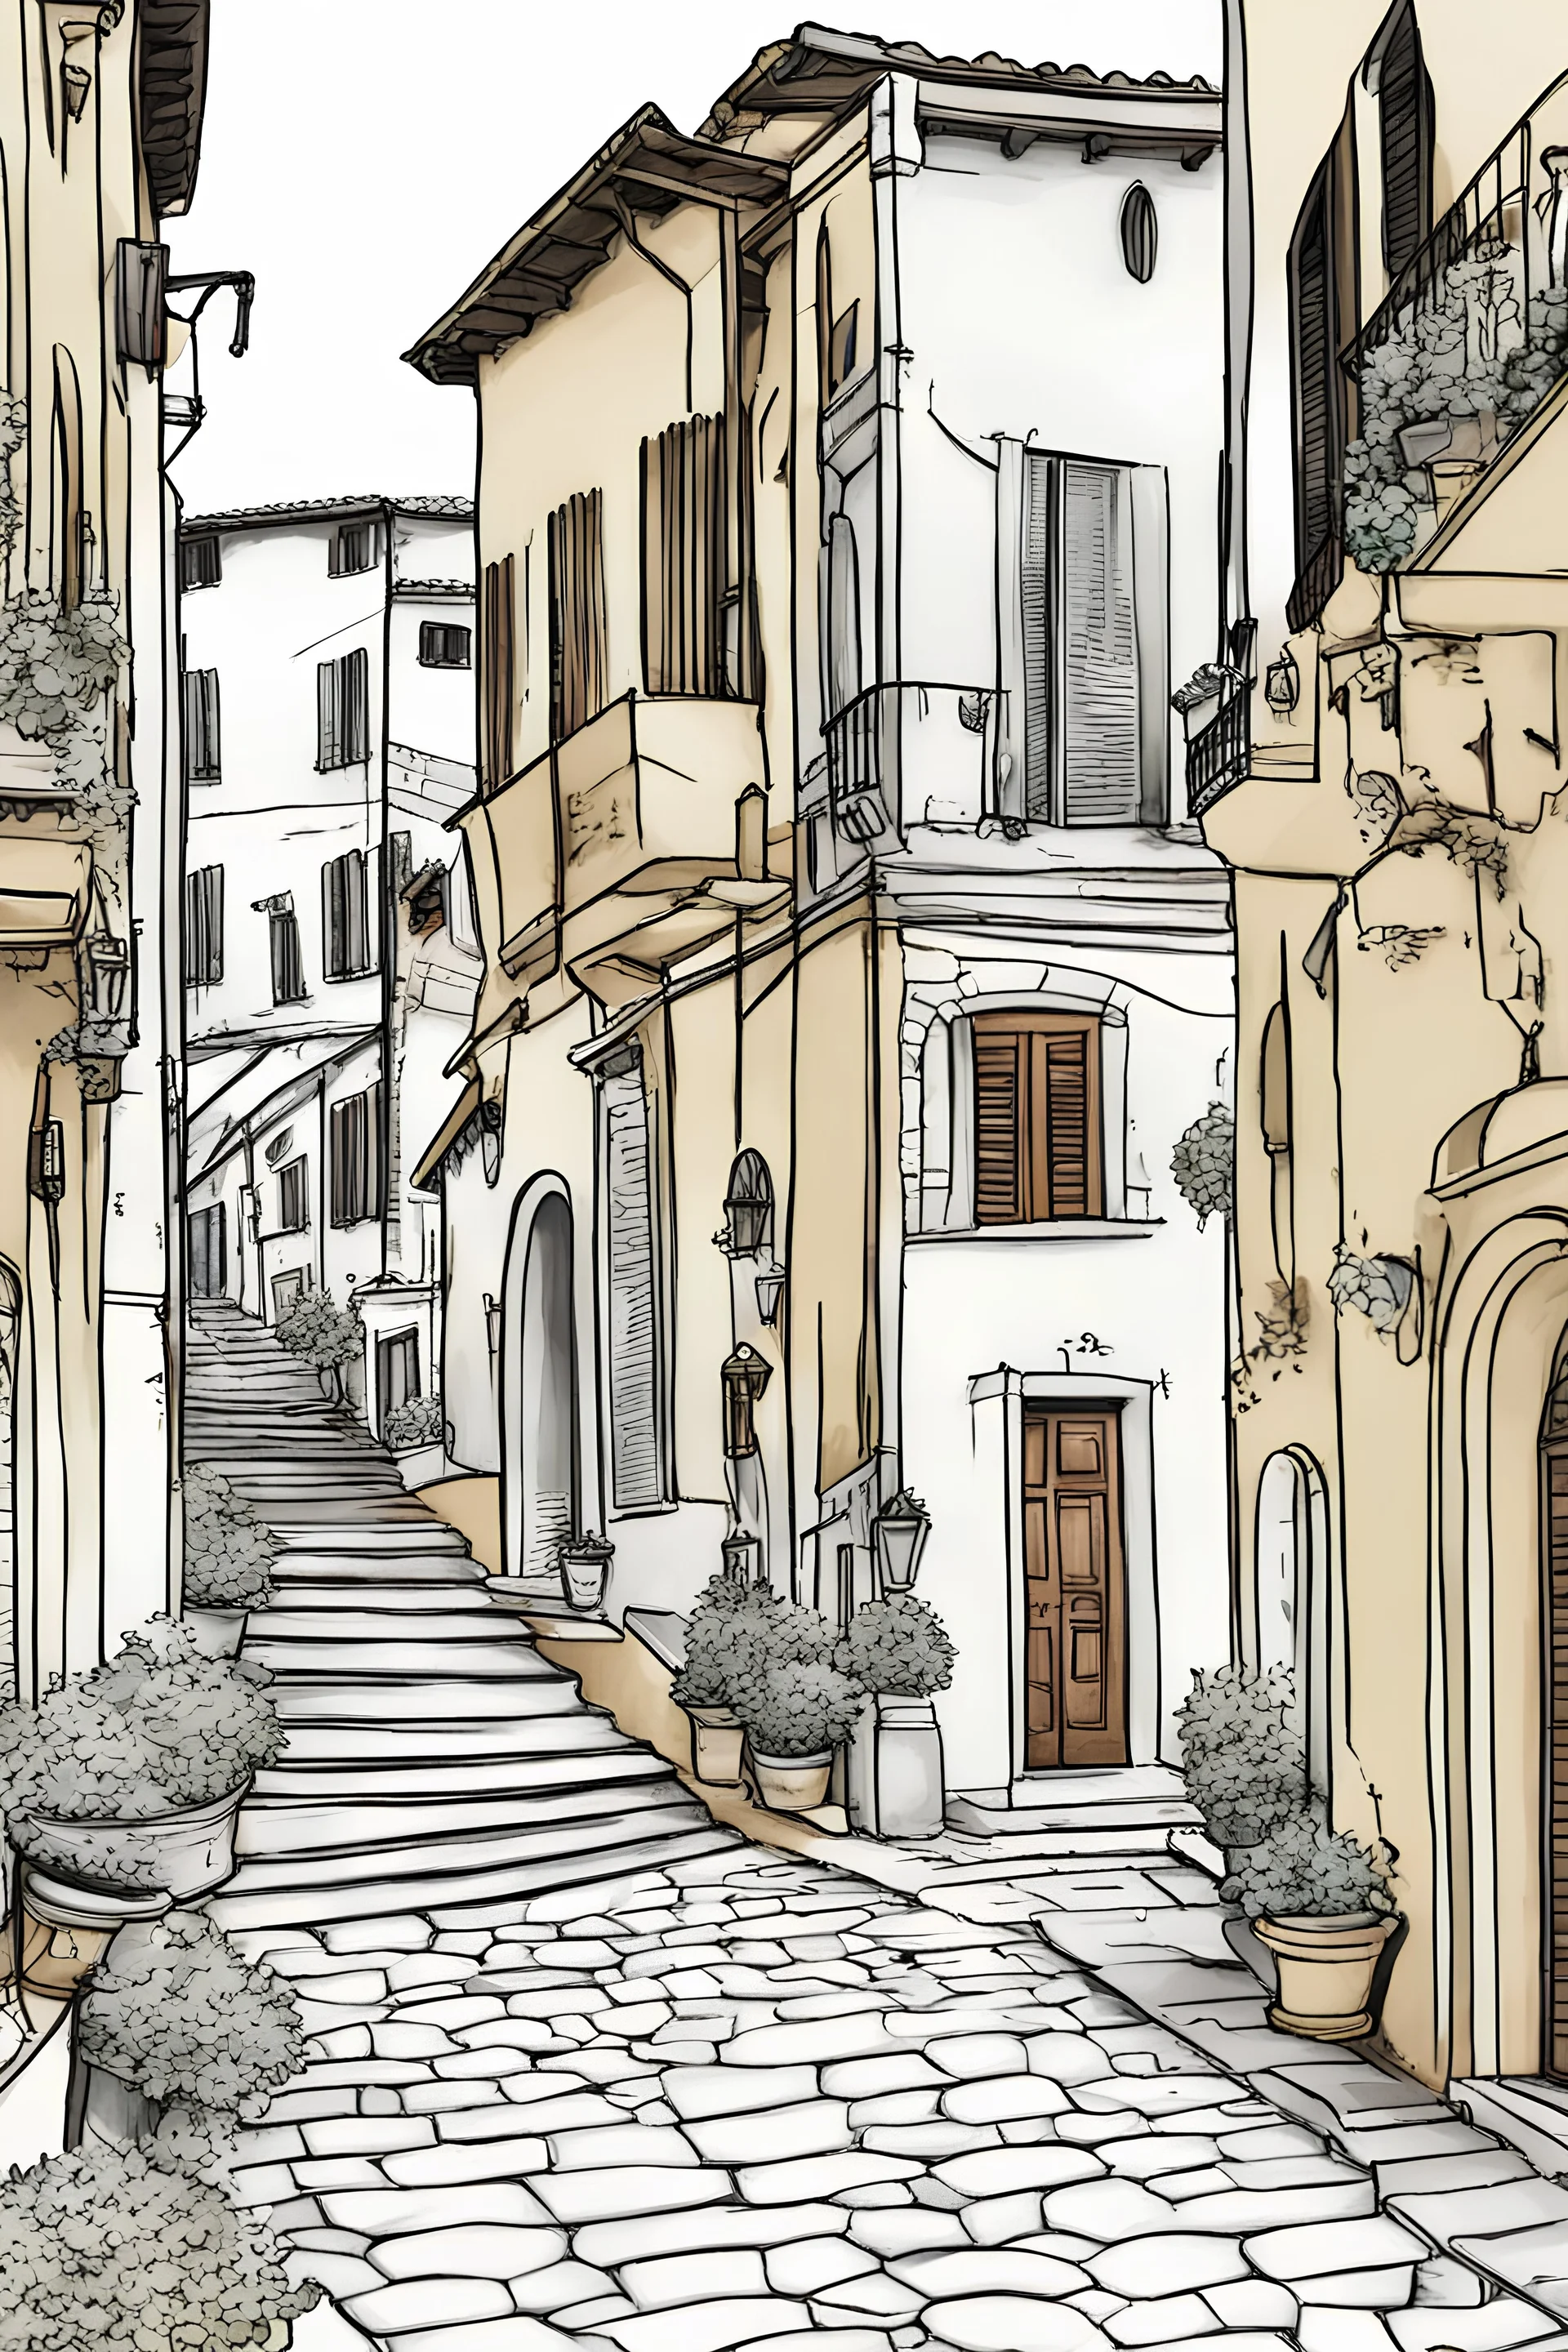 imagine prompt coloring page , iCreate an image showcasing the vibrant and streets of toscana . Include the unique architectural features and lively atmosphere of the city. Convey the joy and liveliness of wandering through the streets of this Italian city without people." a white background, 9:11